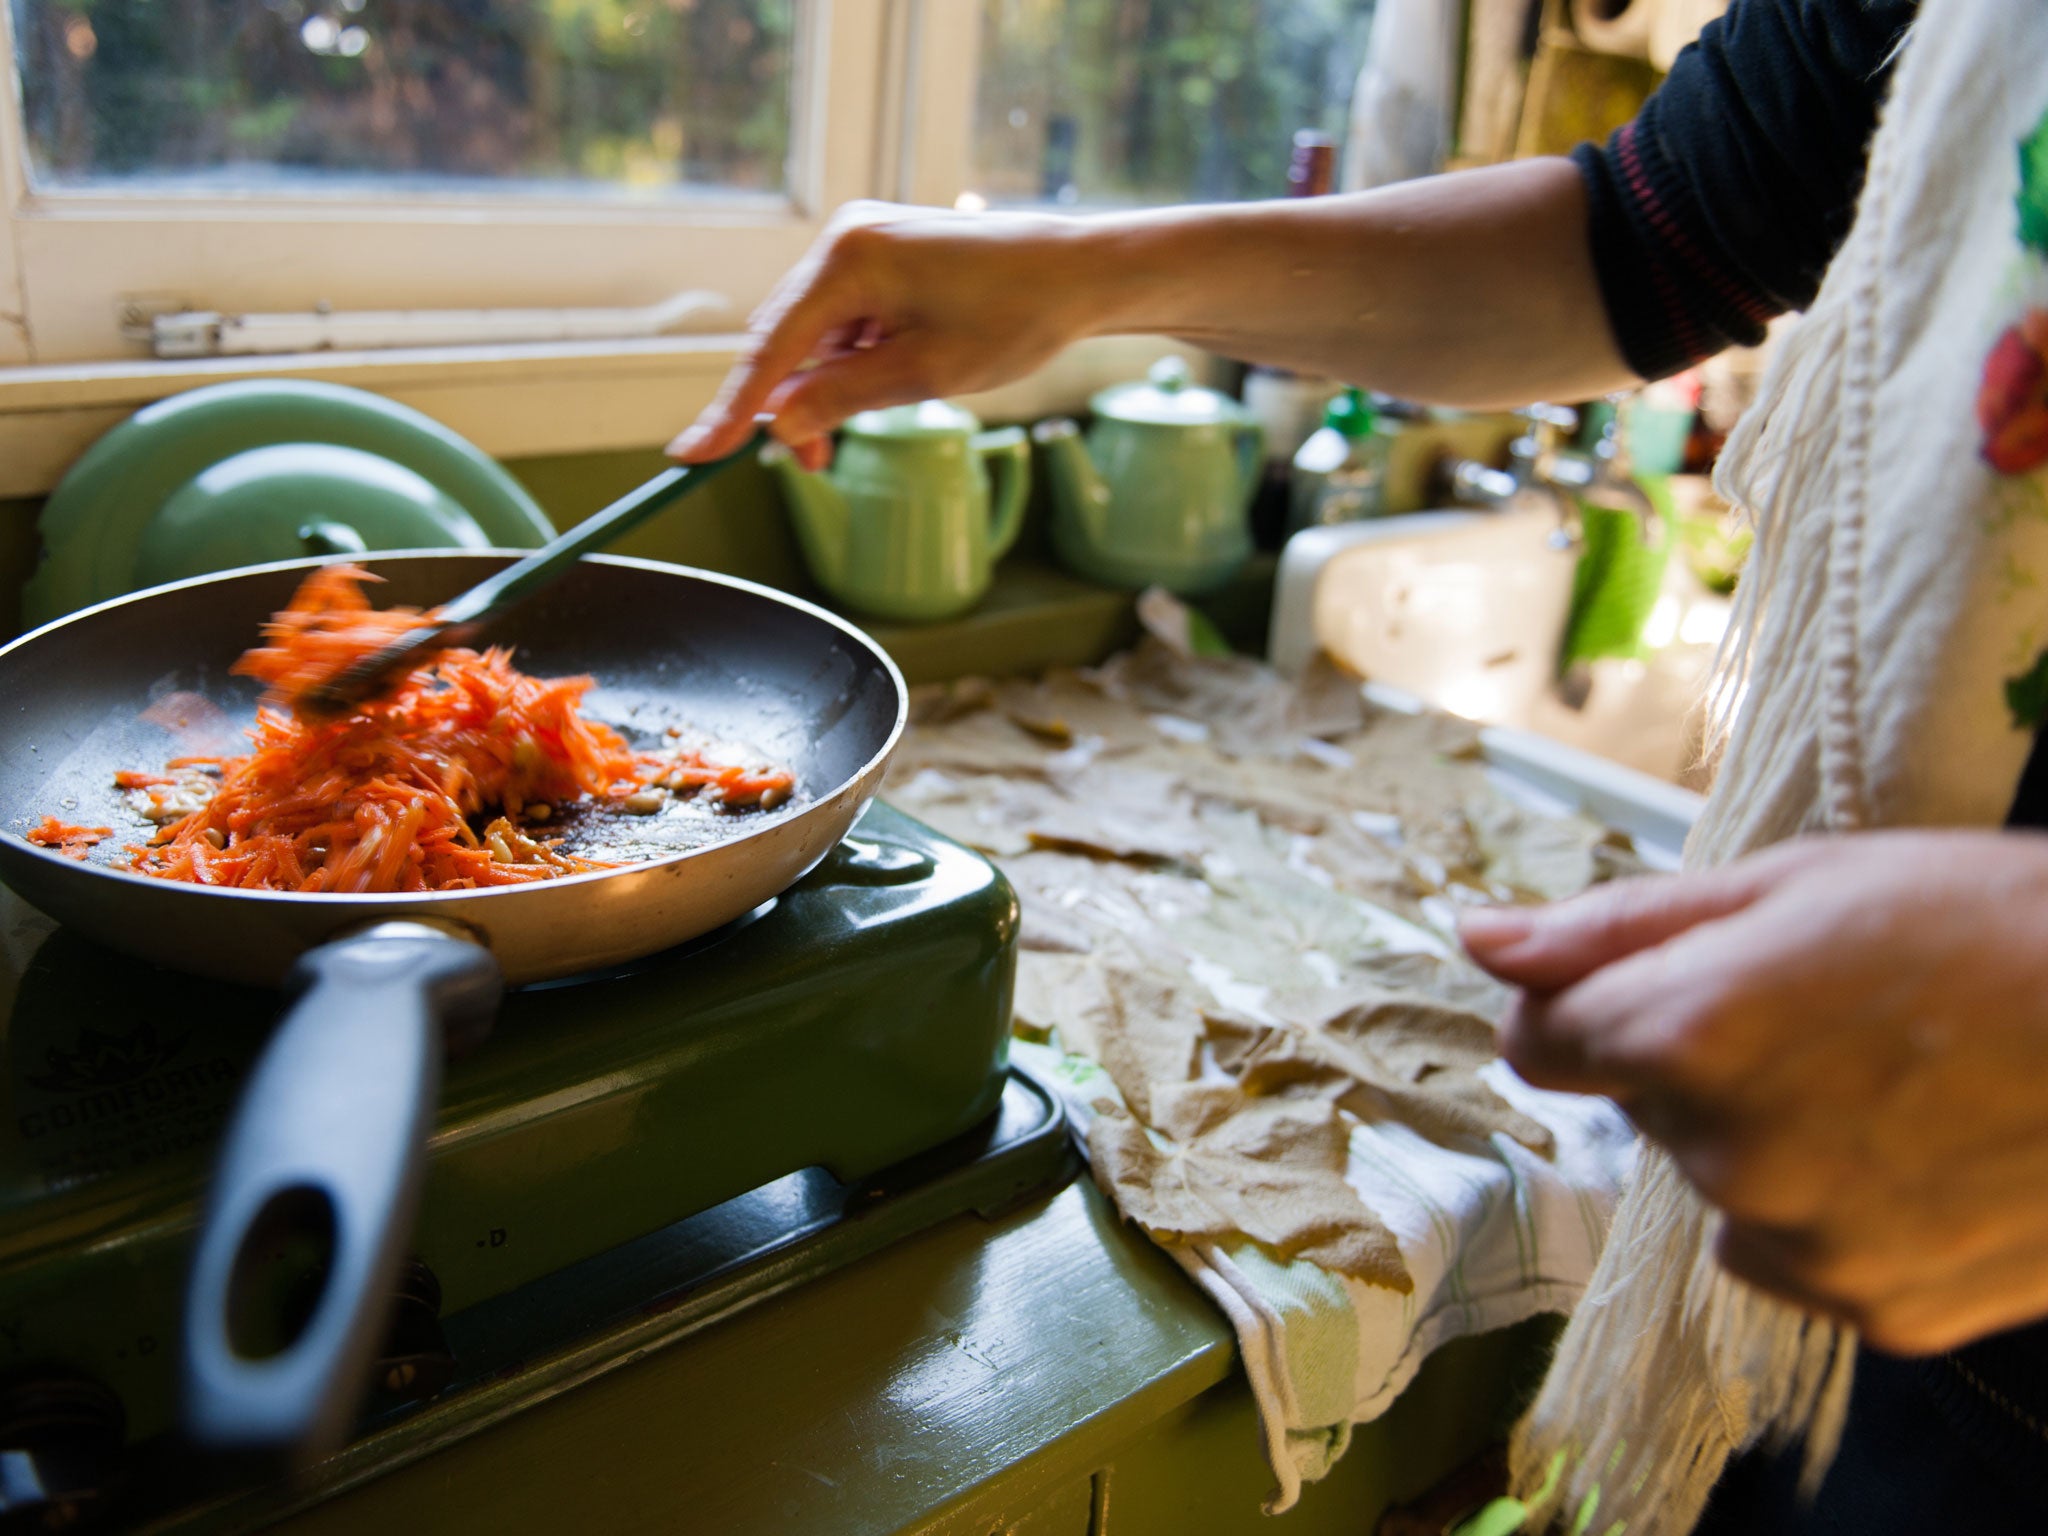 File photo: After the UK was declared one of the worst countries in Europe for citizens being able to afford to buy food, a woman in Wales has offered to cook free meals for families in need